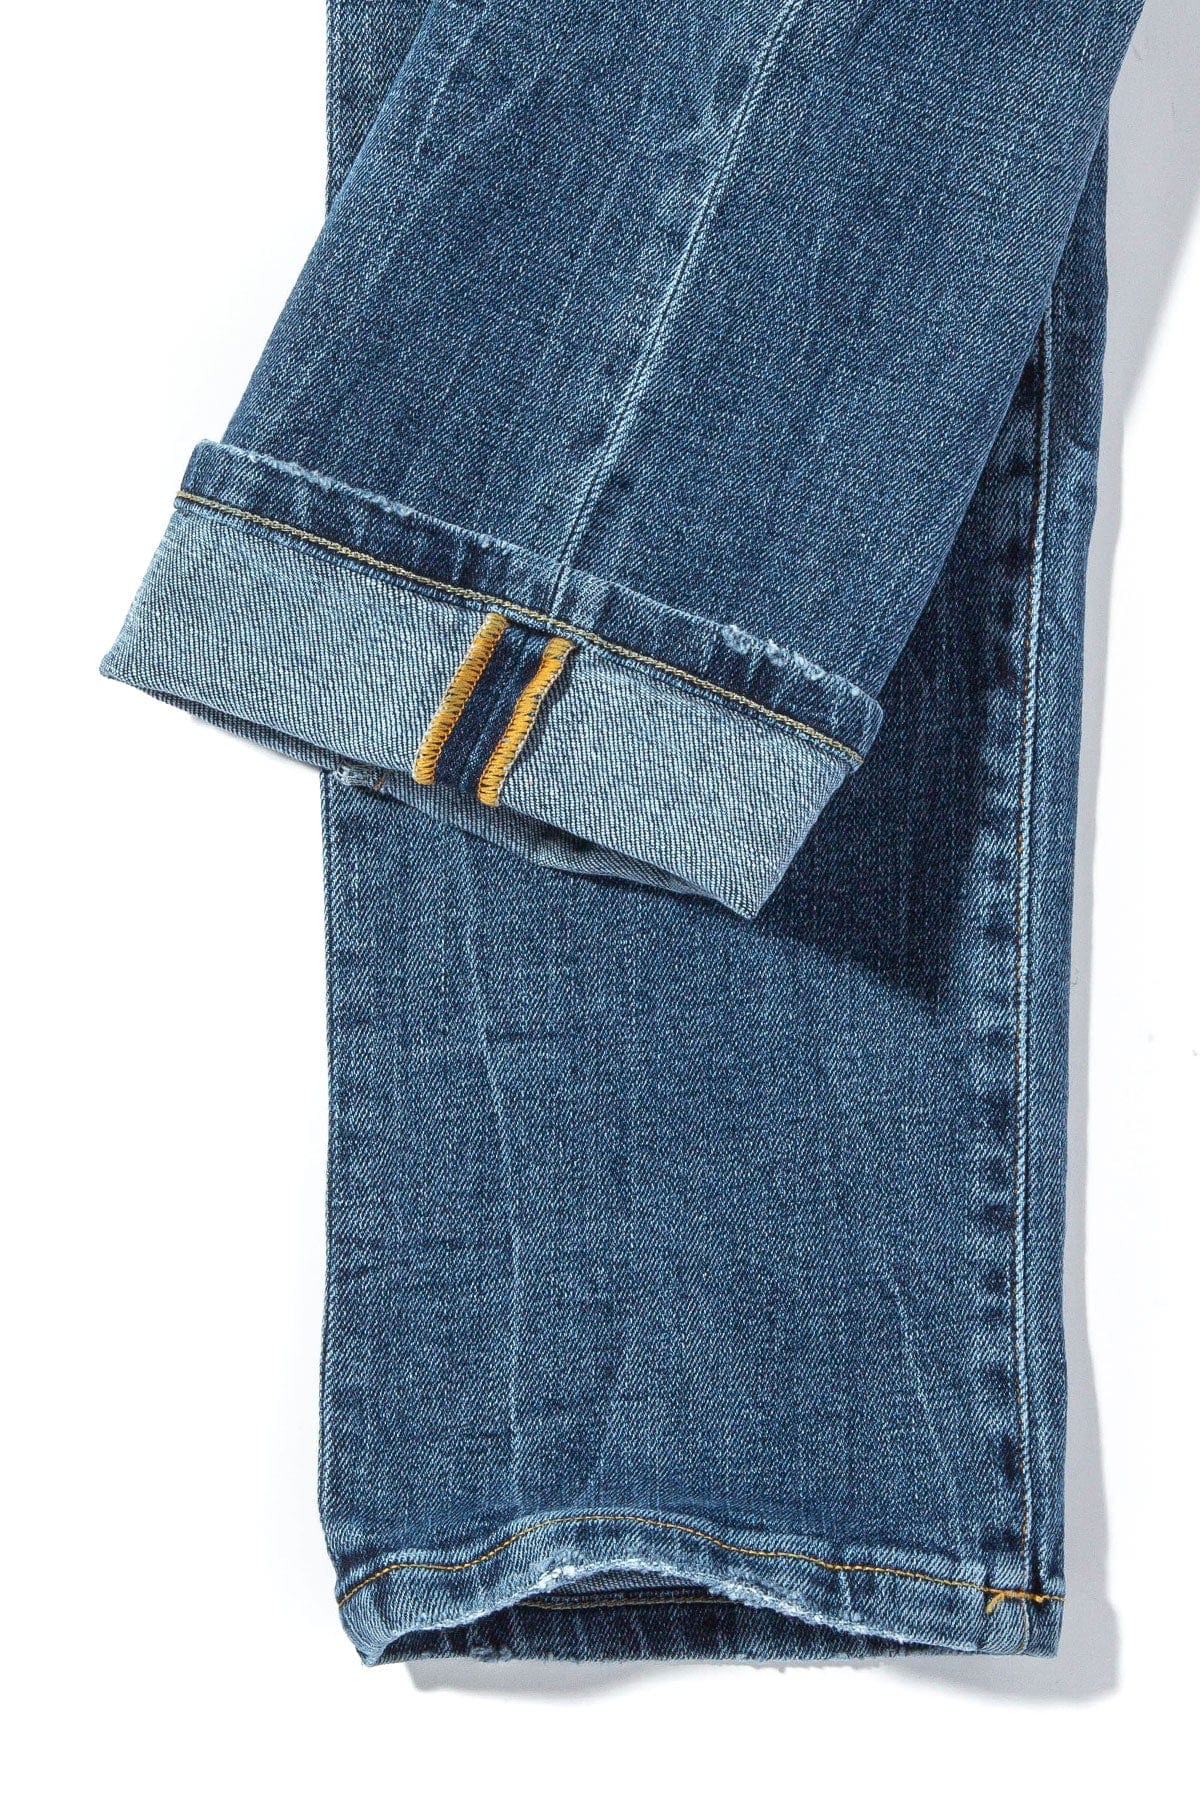 Mens 5 Pocket Knit Denim Pants With Elastic Waist And Leg Band at Rs  1799/piece, Jeans in Mumbai